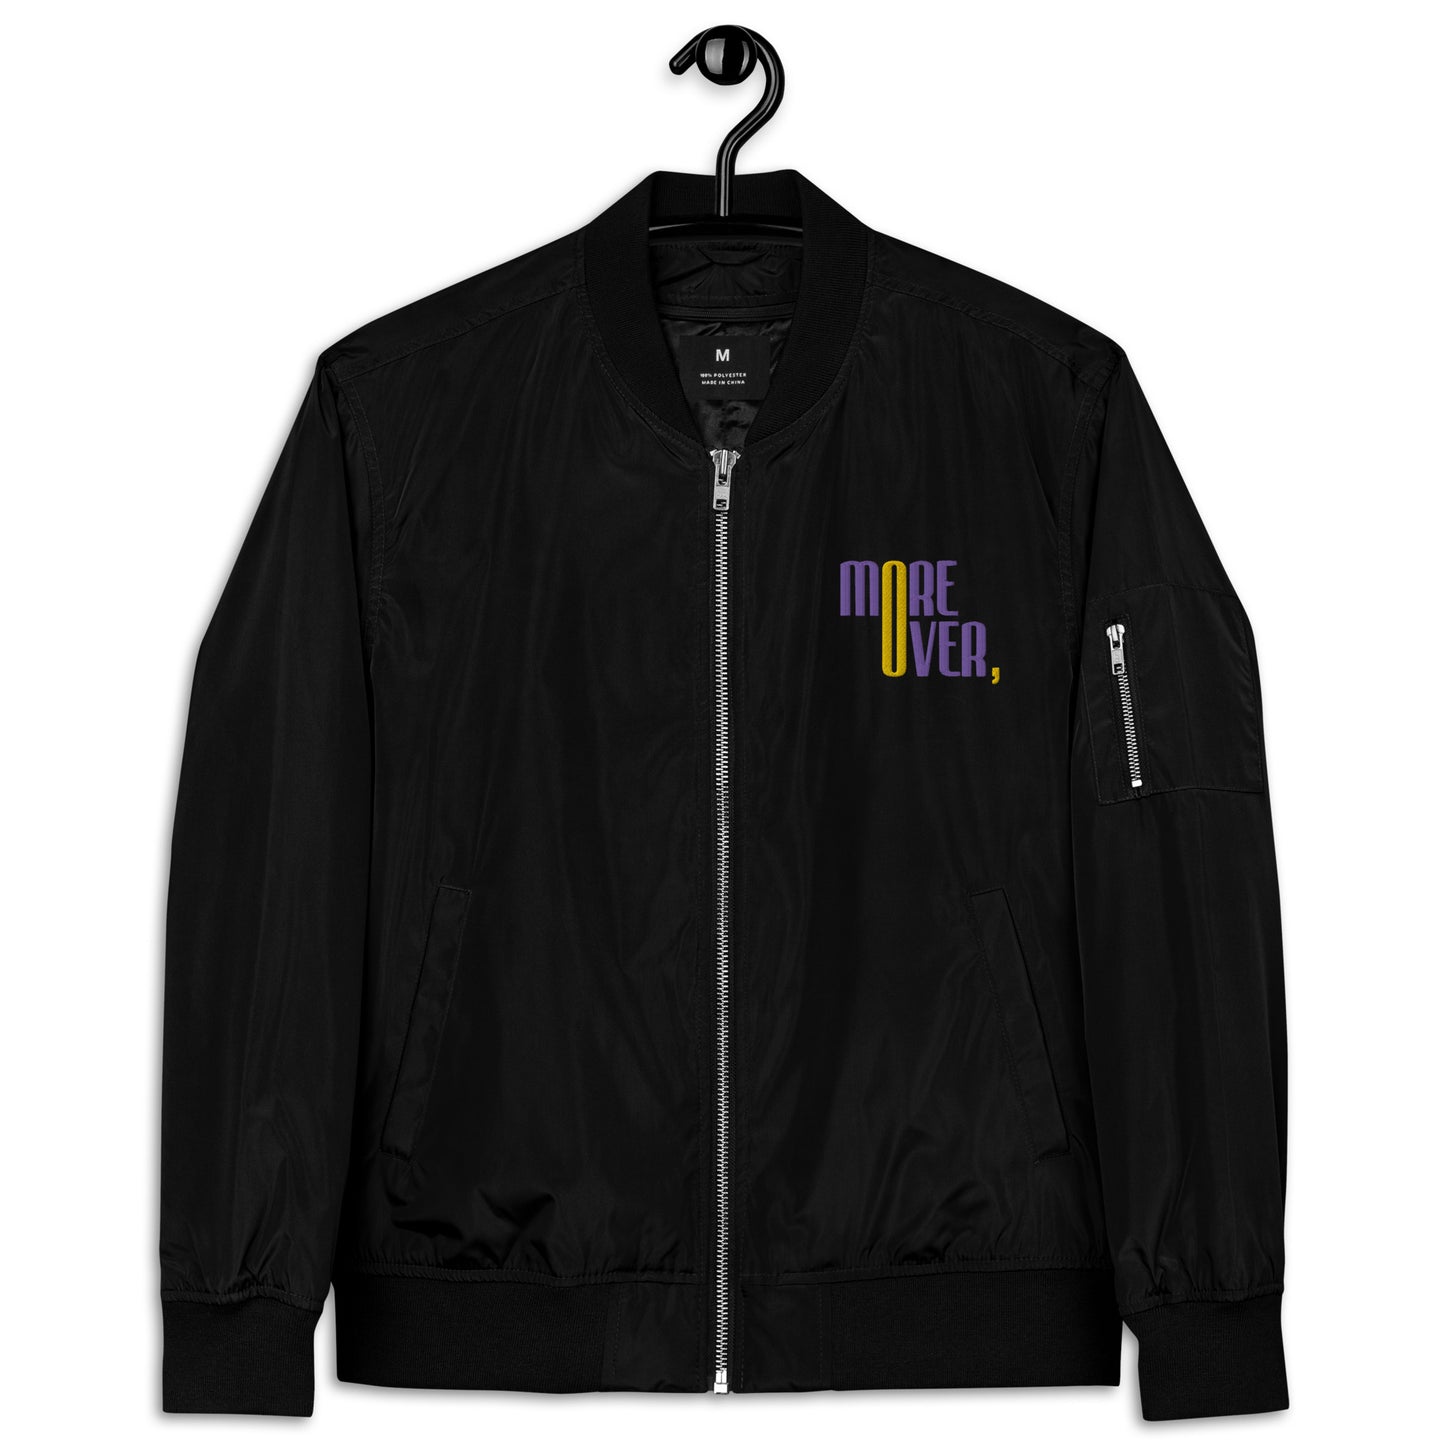 Swords and palm recycled bomber jacket